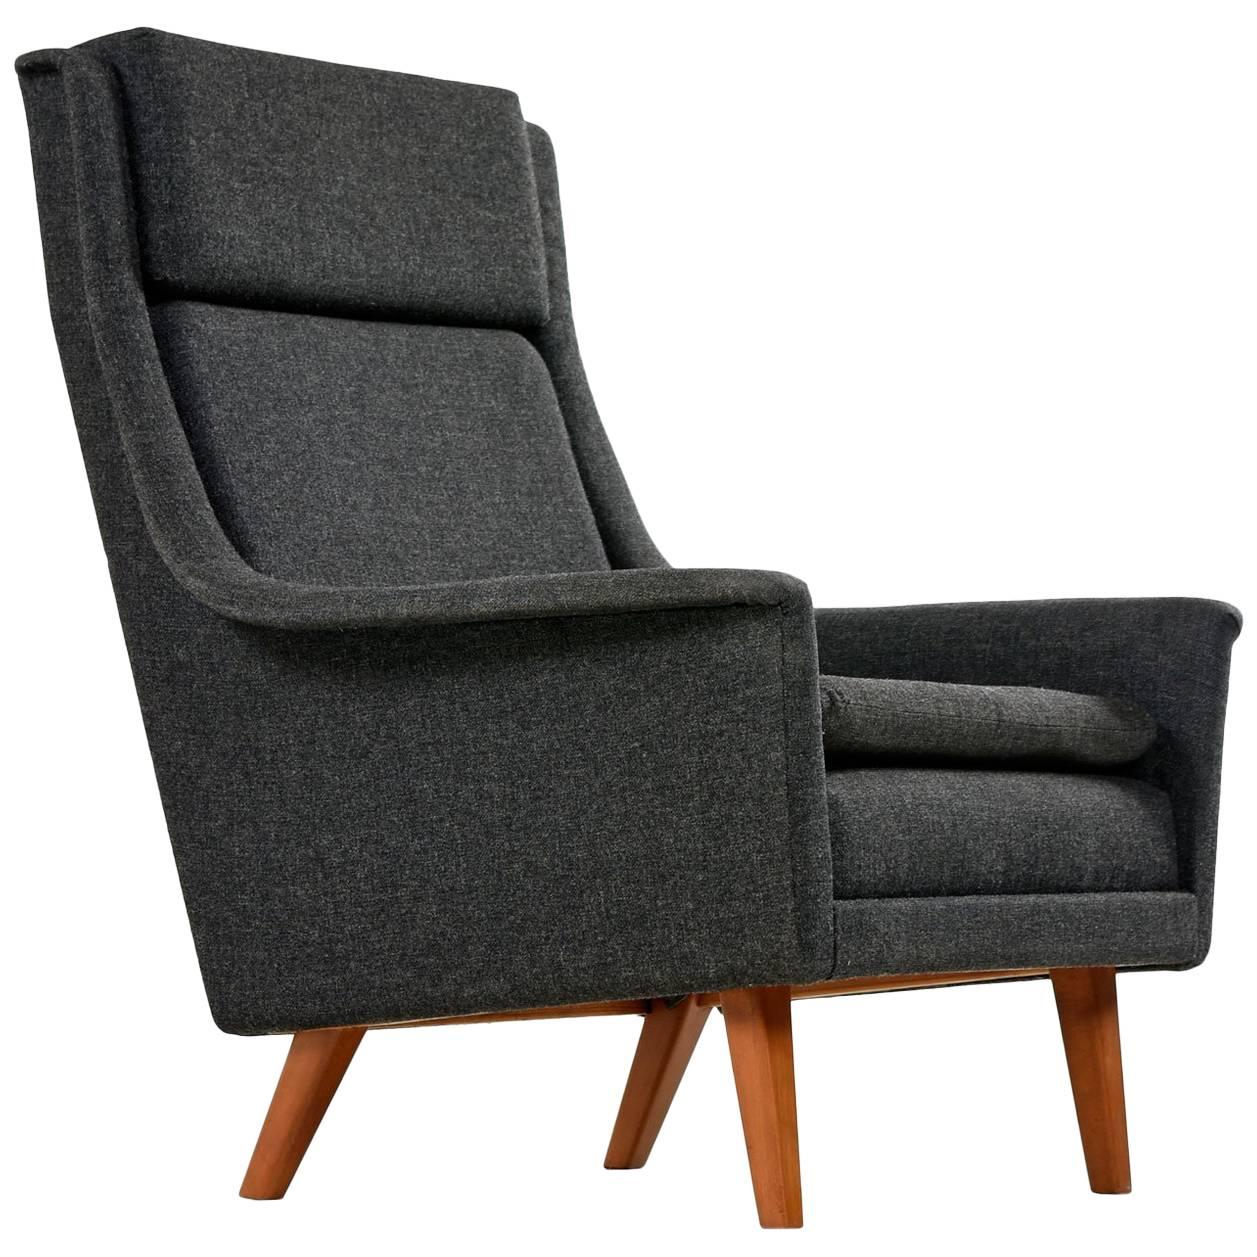 Exceptional, all original condition except for new decking upholstery and new foam seat cushion. The dark grey fabric is as stylish and fashionable now as it was in the 1960s. Segmented, separate back and head rest cushions create a masculine, yet